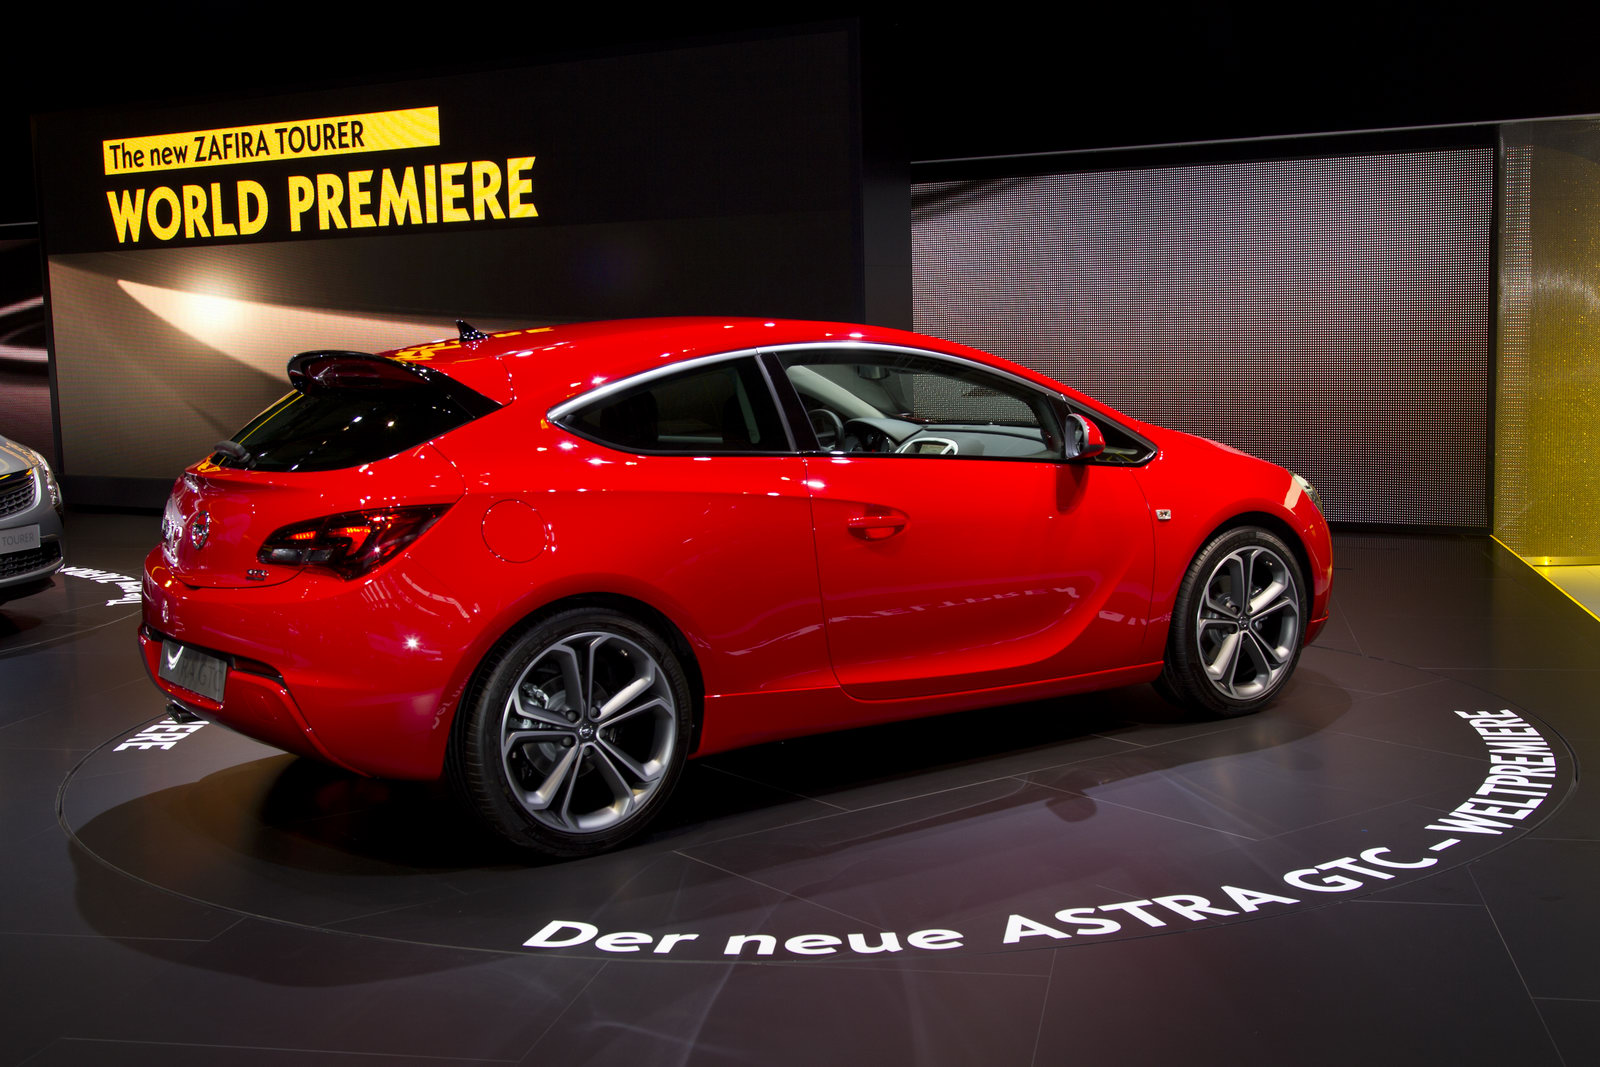 Report: New Opel Astra GTC May Make it to the States as a Buick